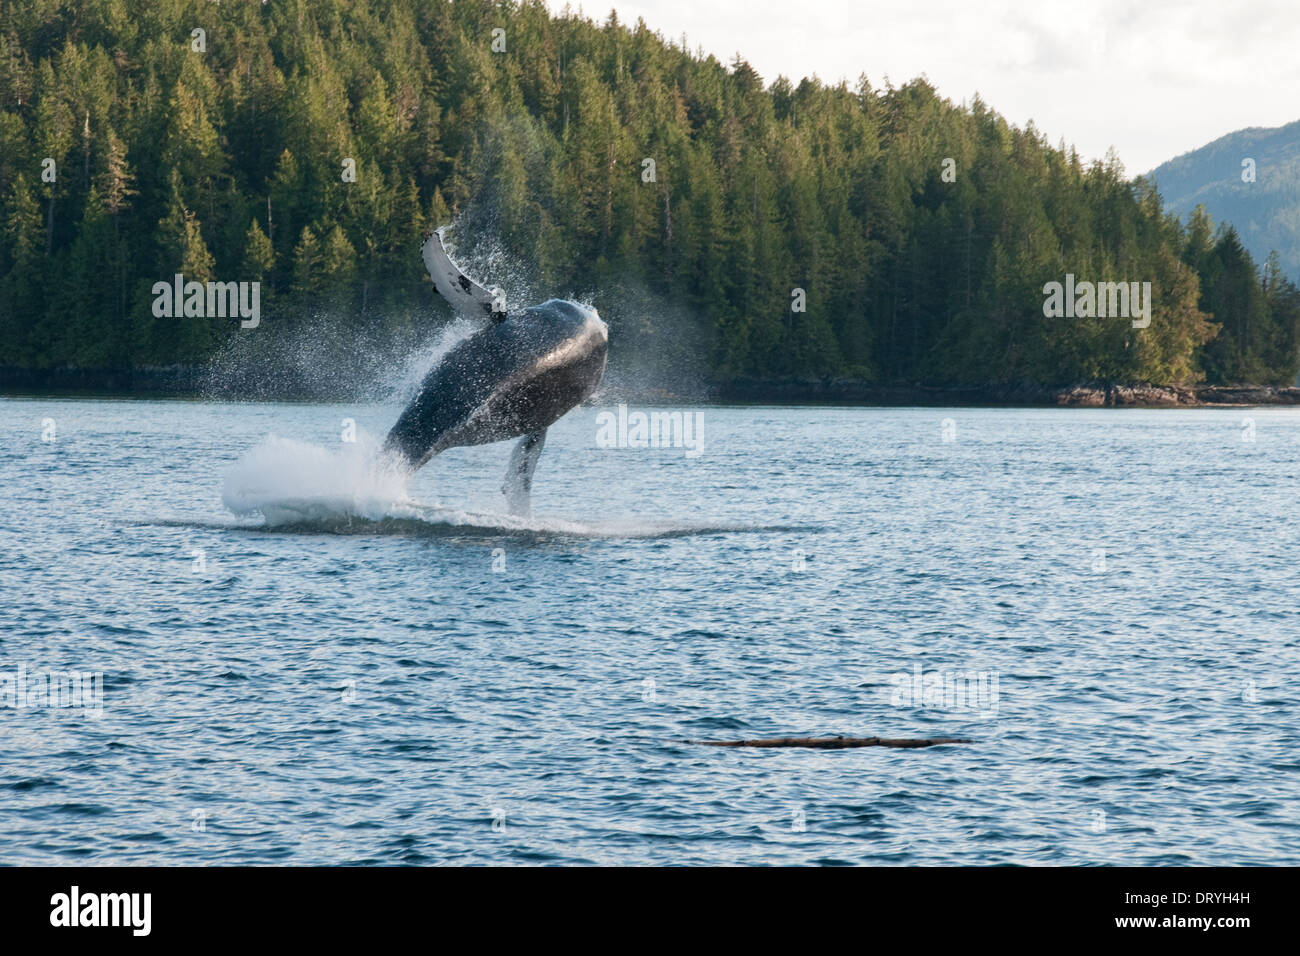 A humpback whale breaching in Pacific coastal waters in the Great Bear Rainforest, north coast, British Columbia, Canada. Stock Photo